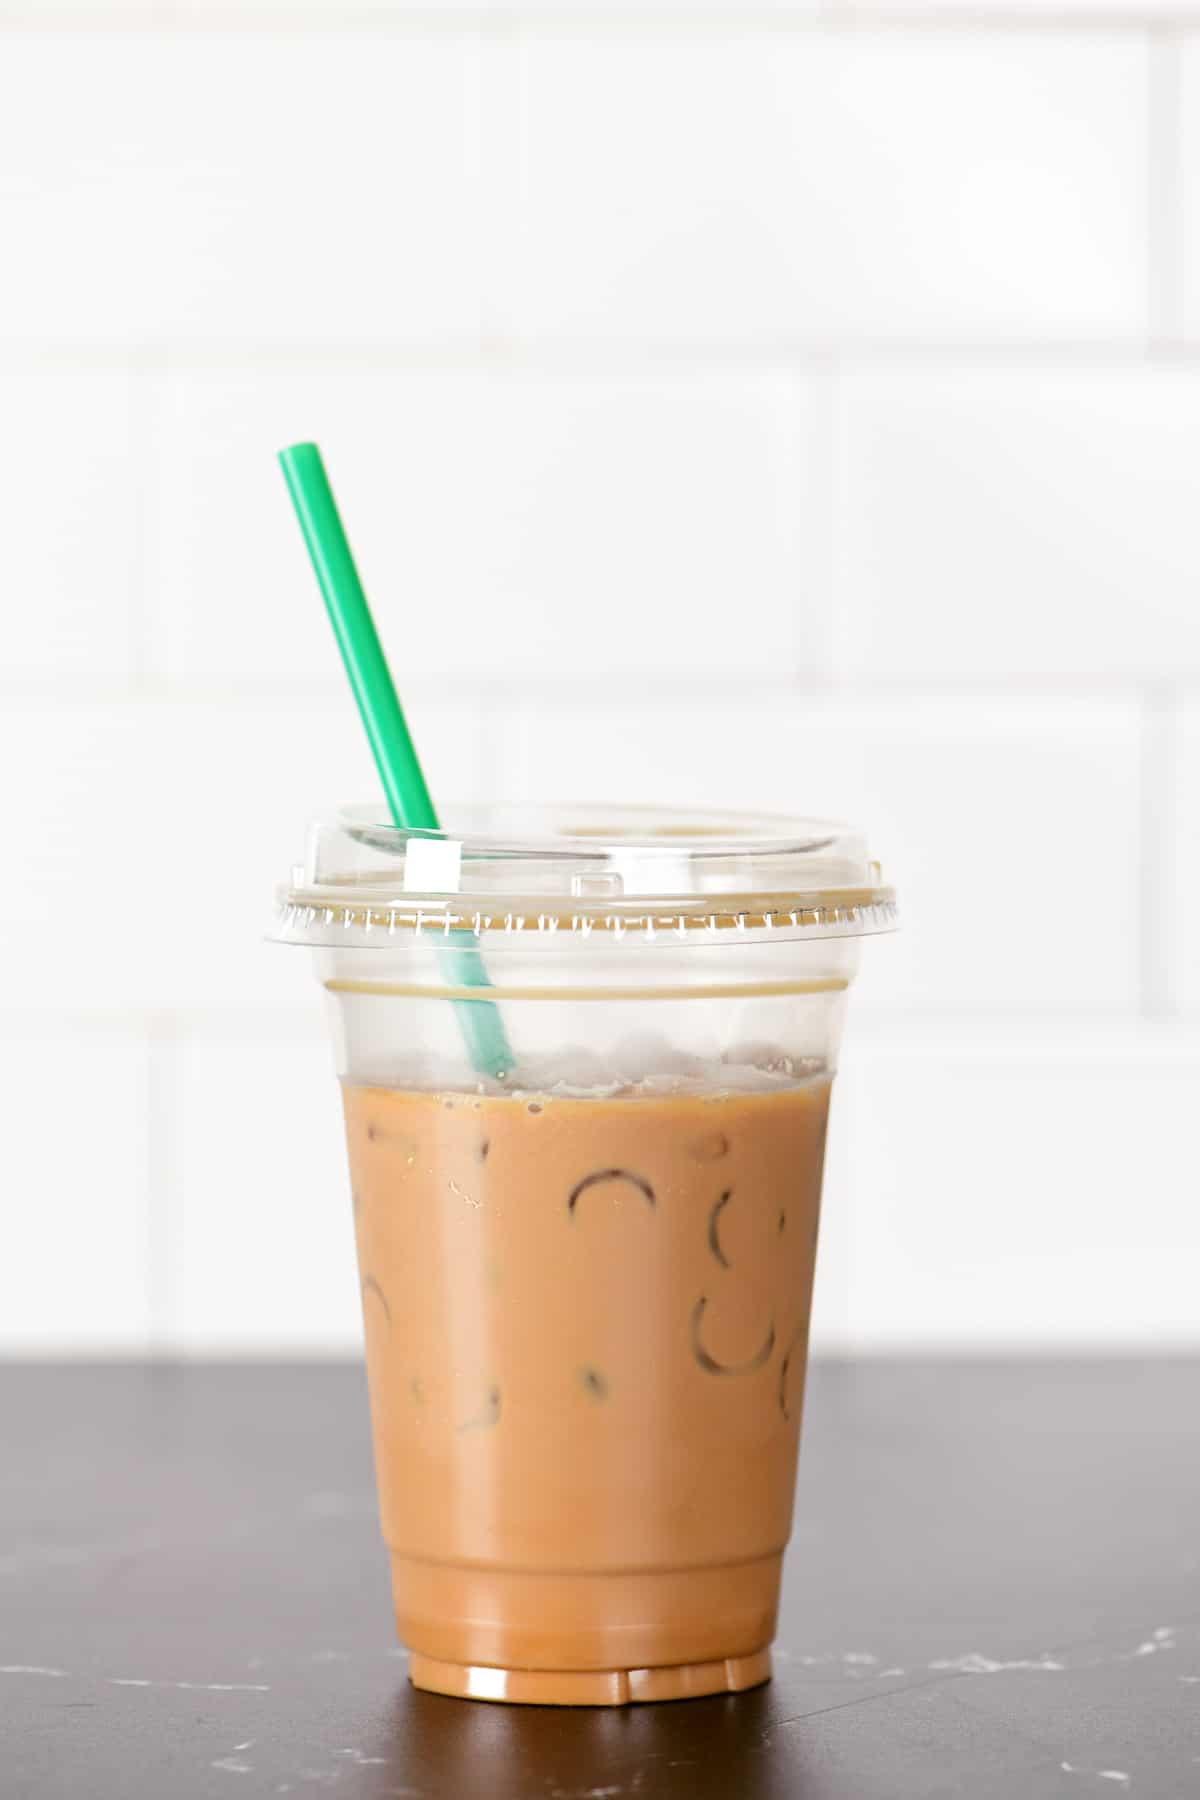 Iced coffee made with instant coffee.